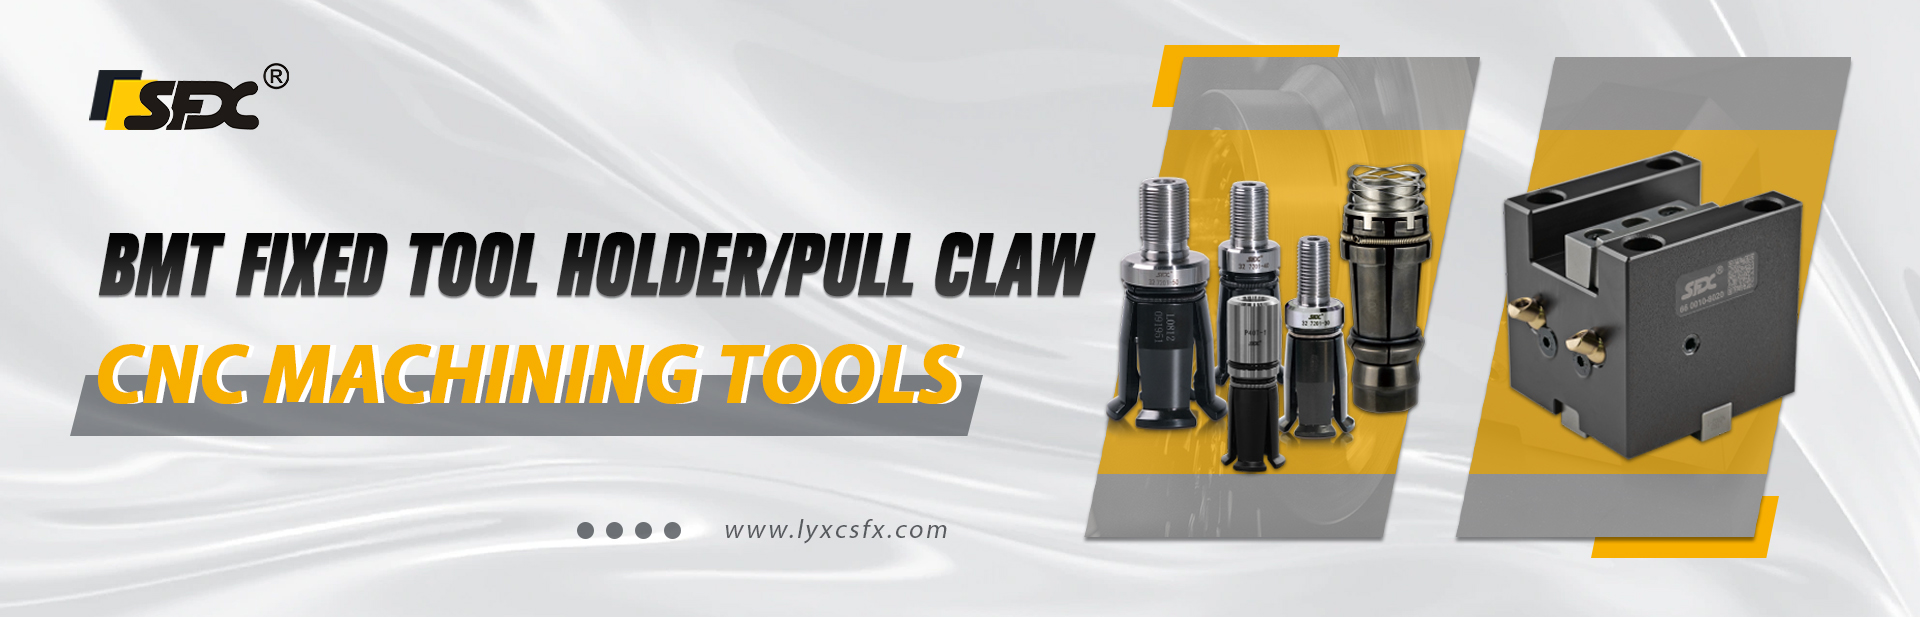 BMT Fixed Tool Holders / Spindle Pull Claw Supplier